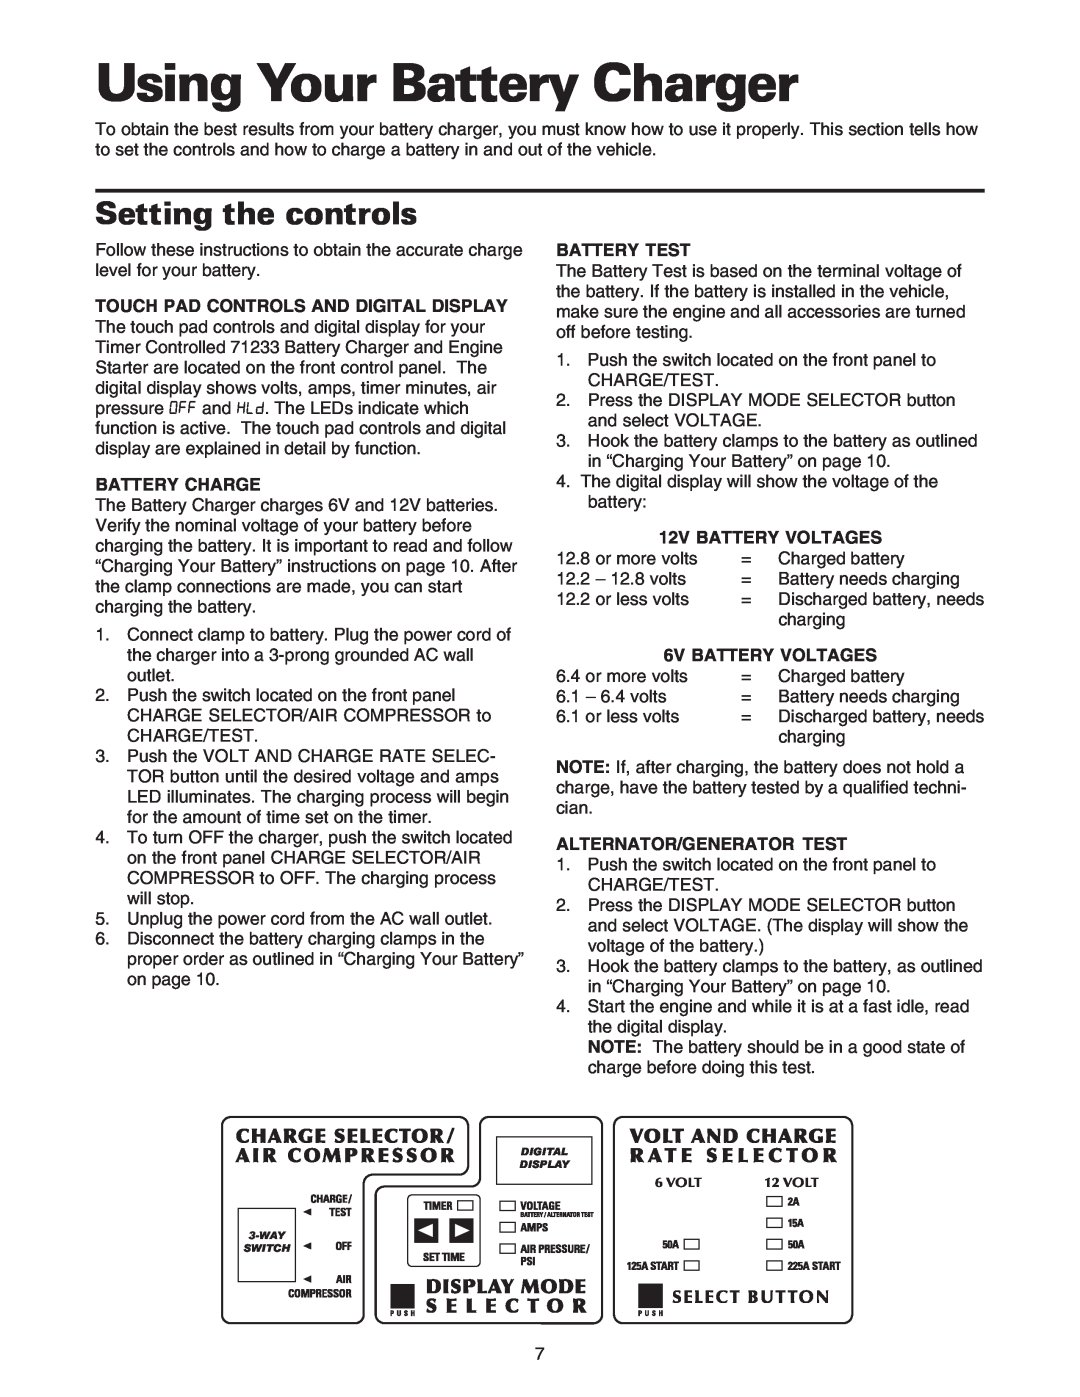 Sears 200.71233 Using Your Battery Charger, Setting the controls, Touch Pad Controls And Digital Display, Battery Test 